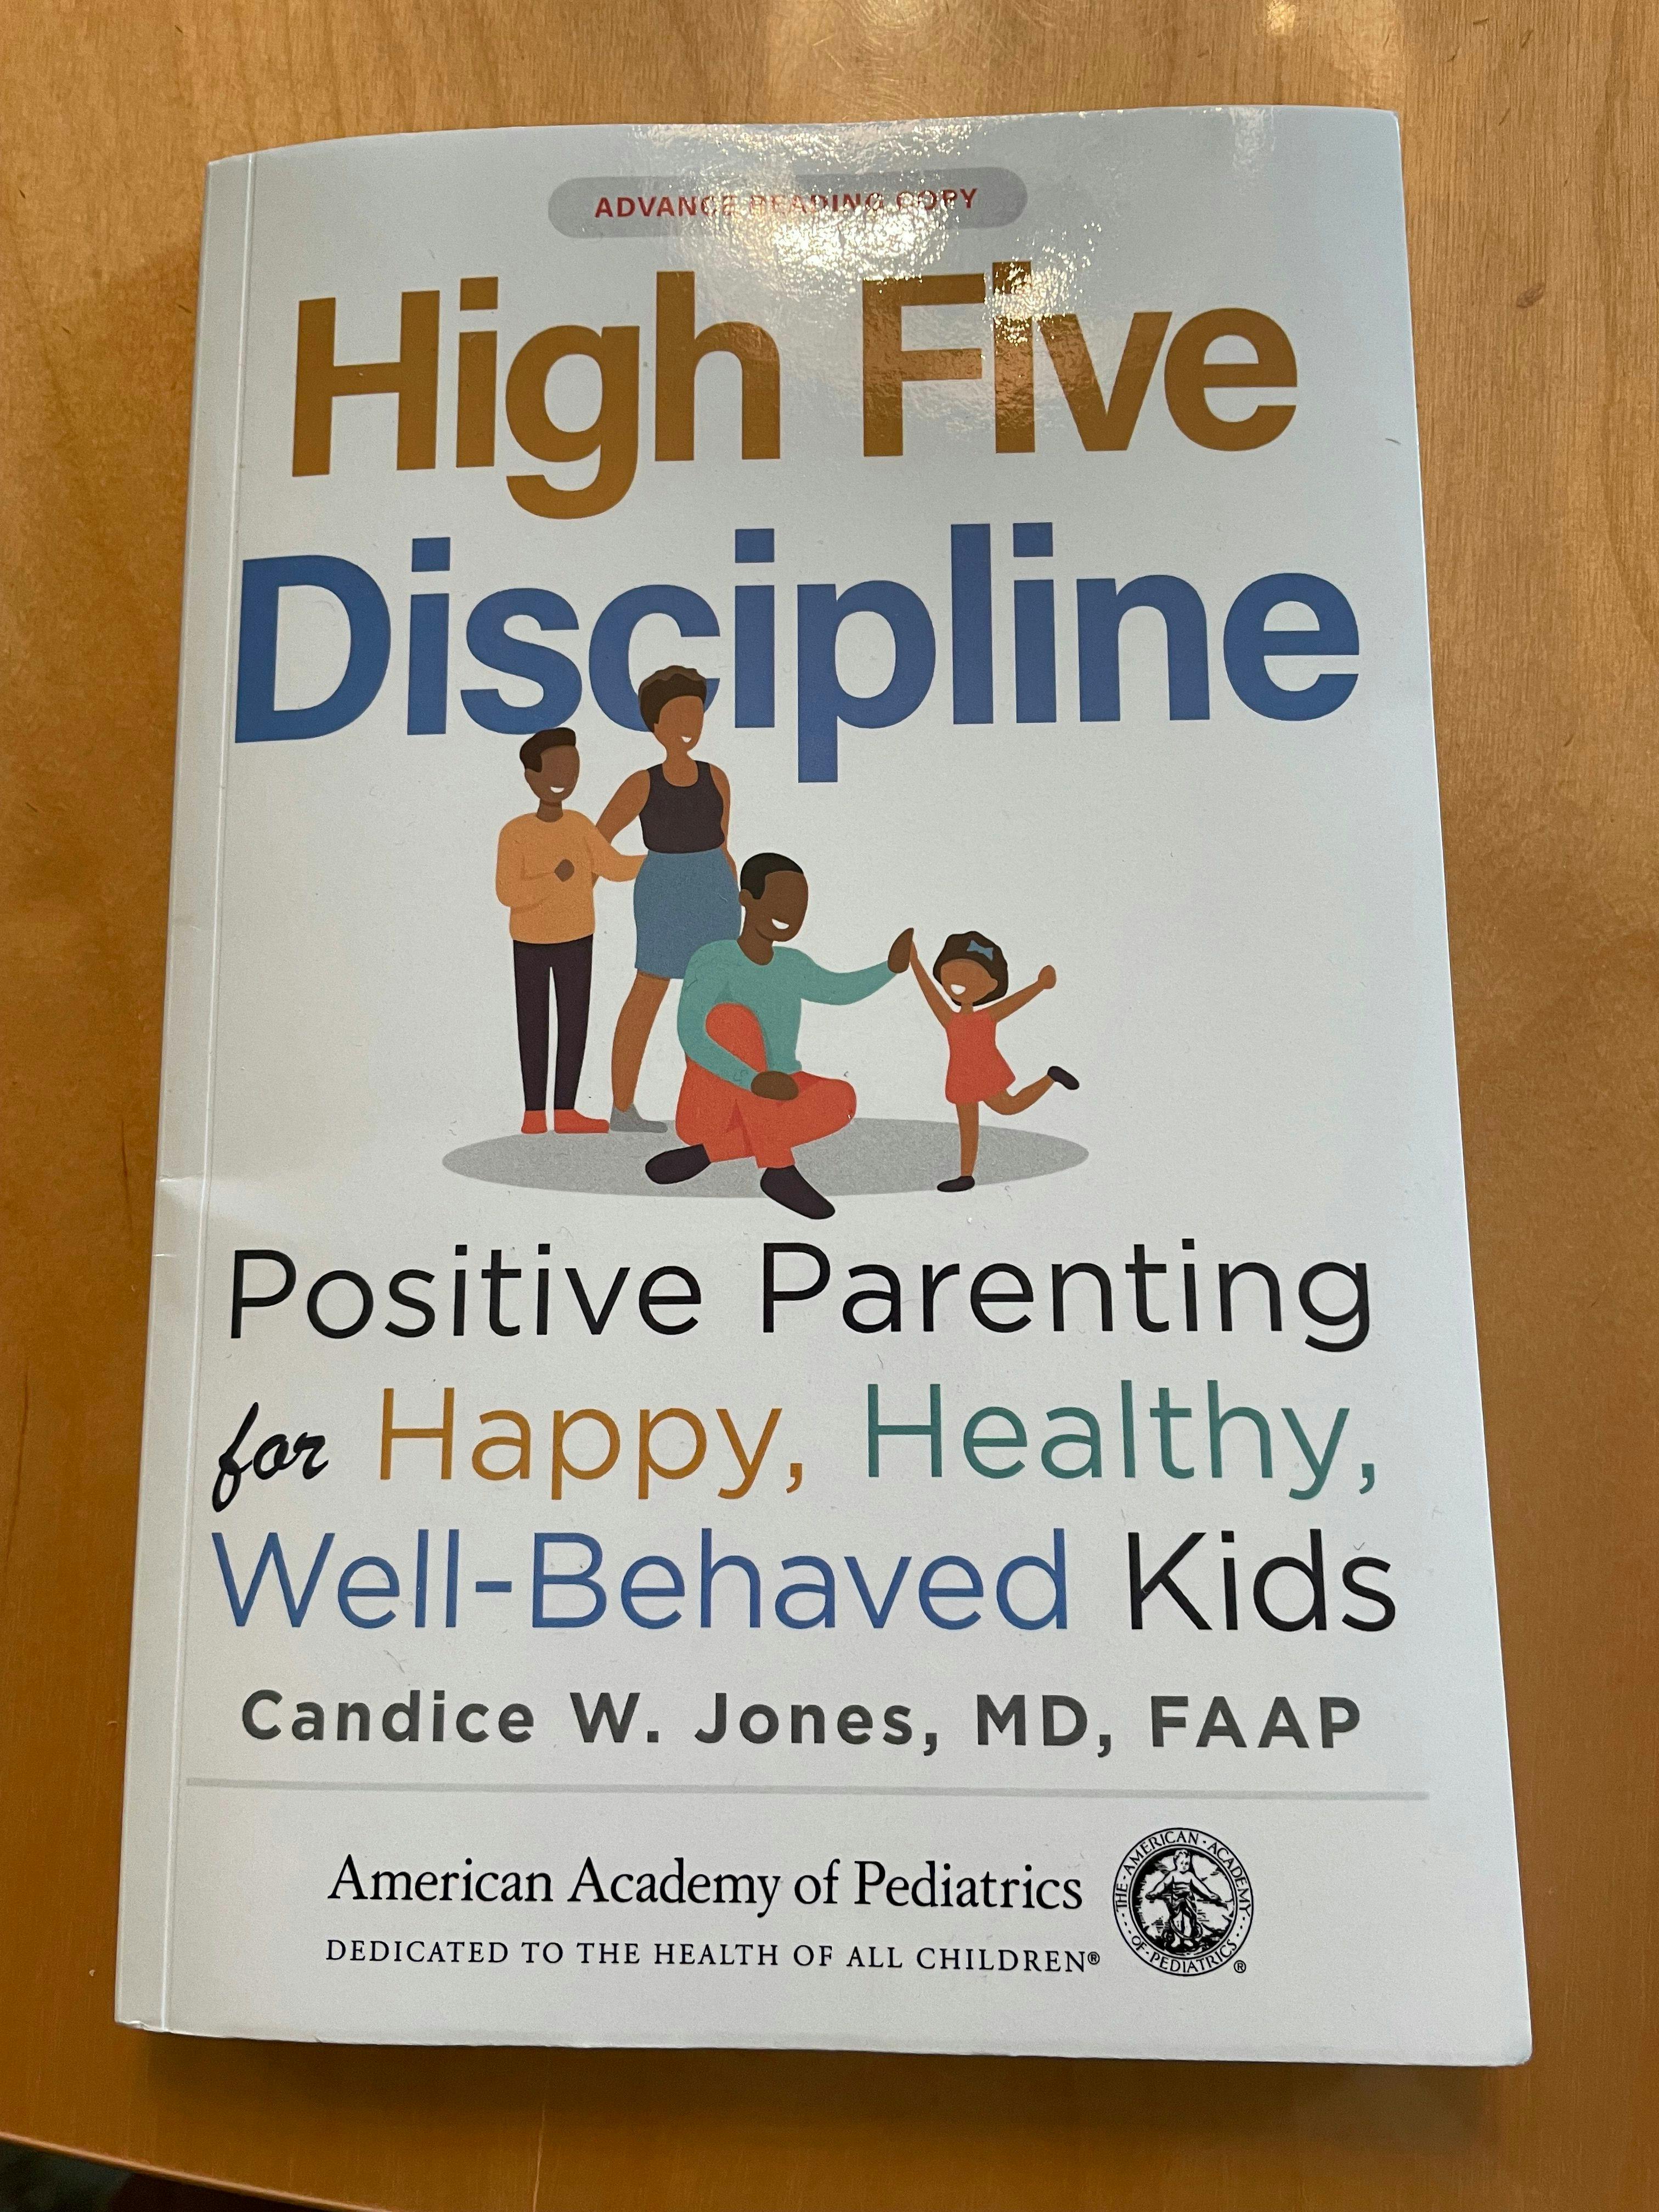 Candice Jones, MD, discusses her new book, "High Five Discipline: Positive Parenting for Happy, Healthy, Well-Behaved Kids"